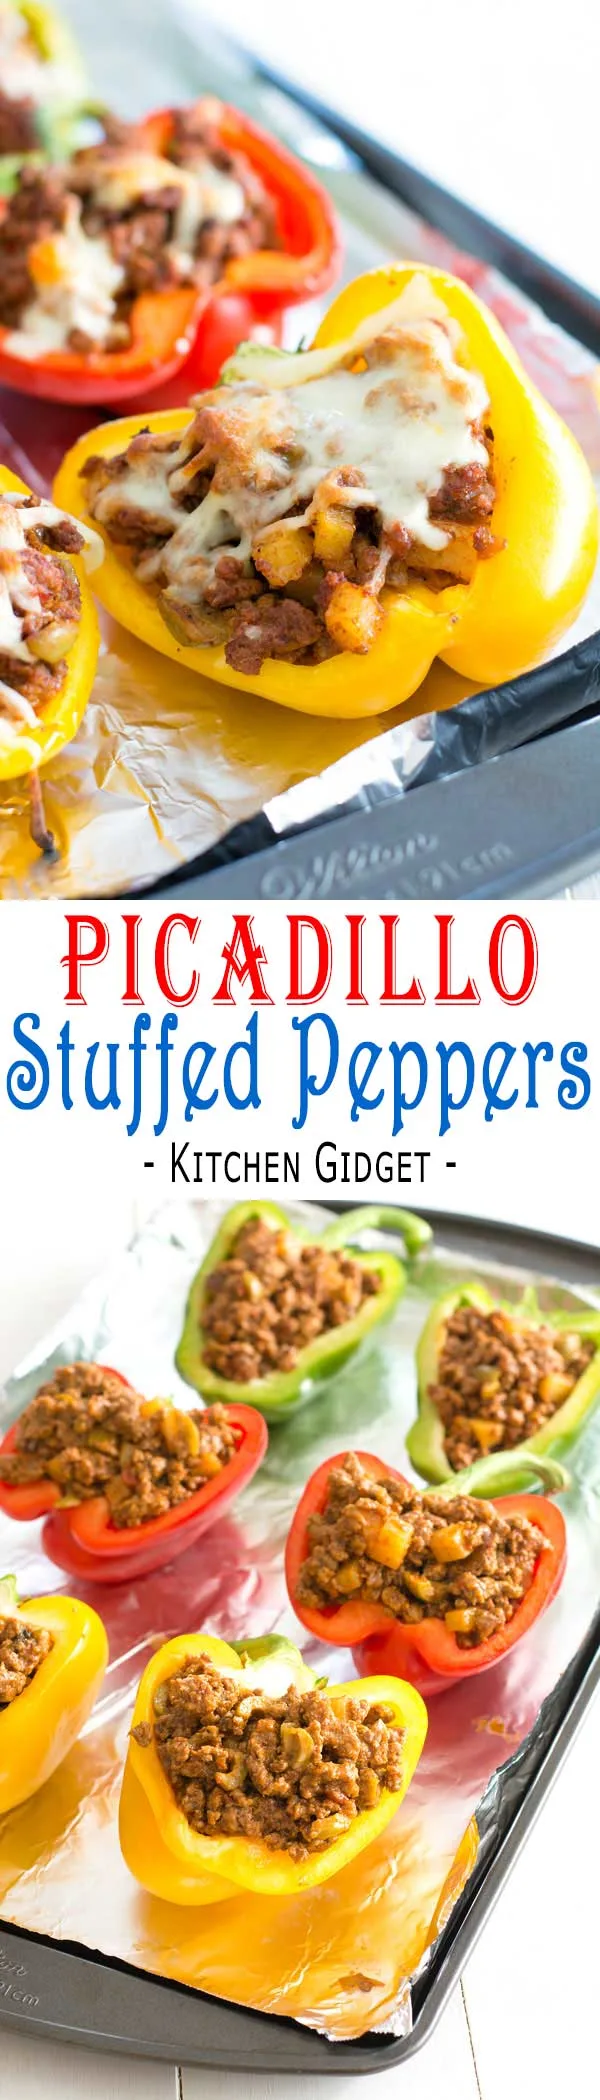 Ground beef picadillo stuffed peppers - a quick and delicious dinner recipe with a Puerto Rican twist!